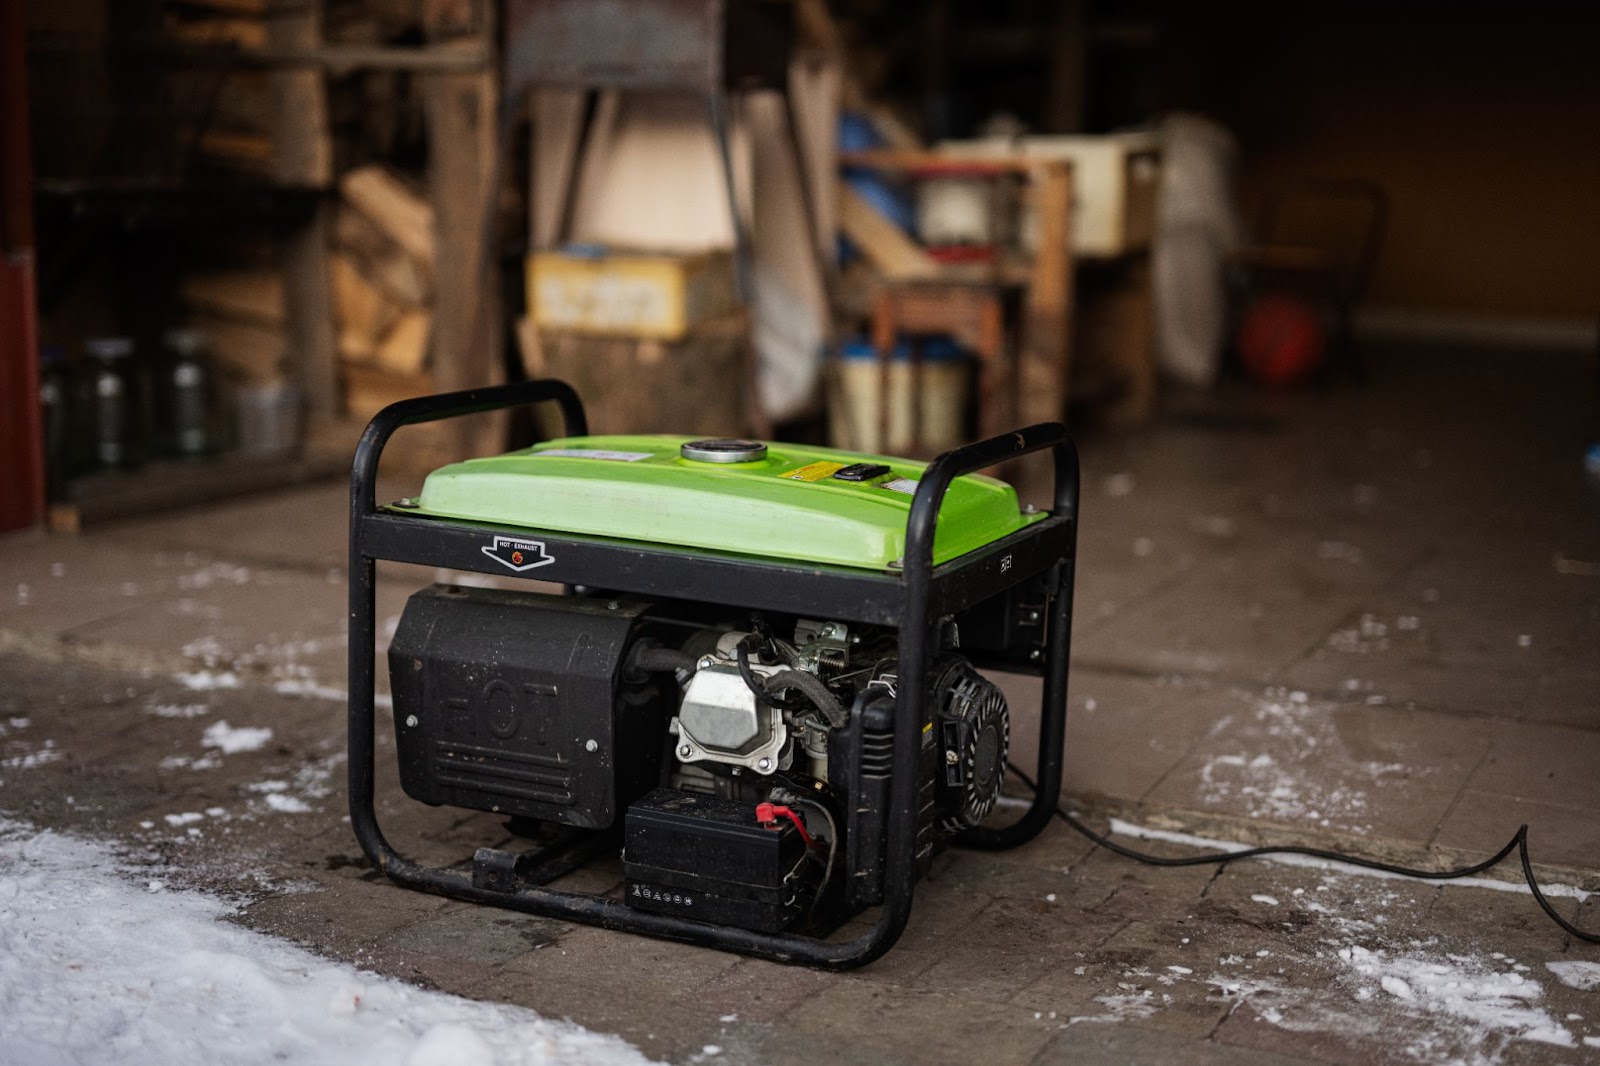 Portable generator in a garage next to snow. 